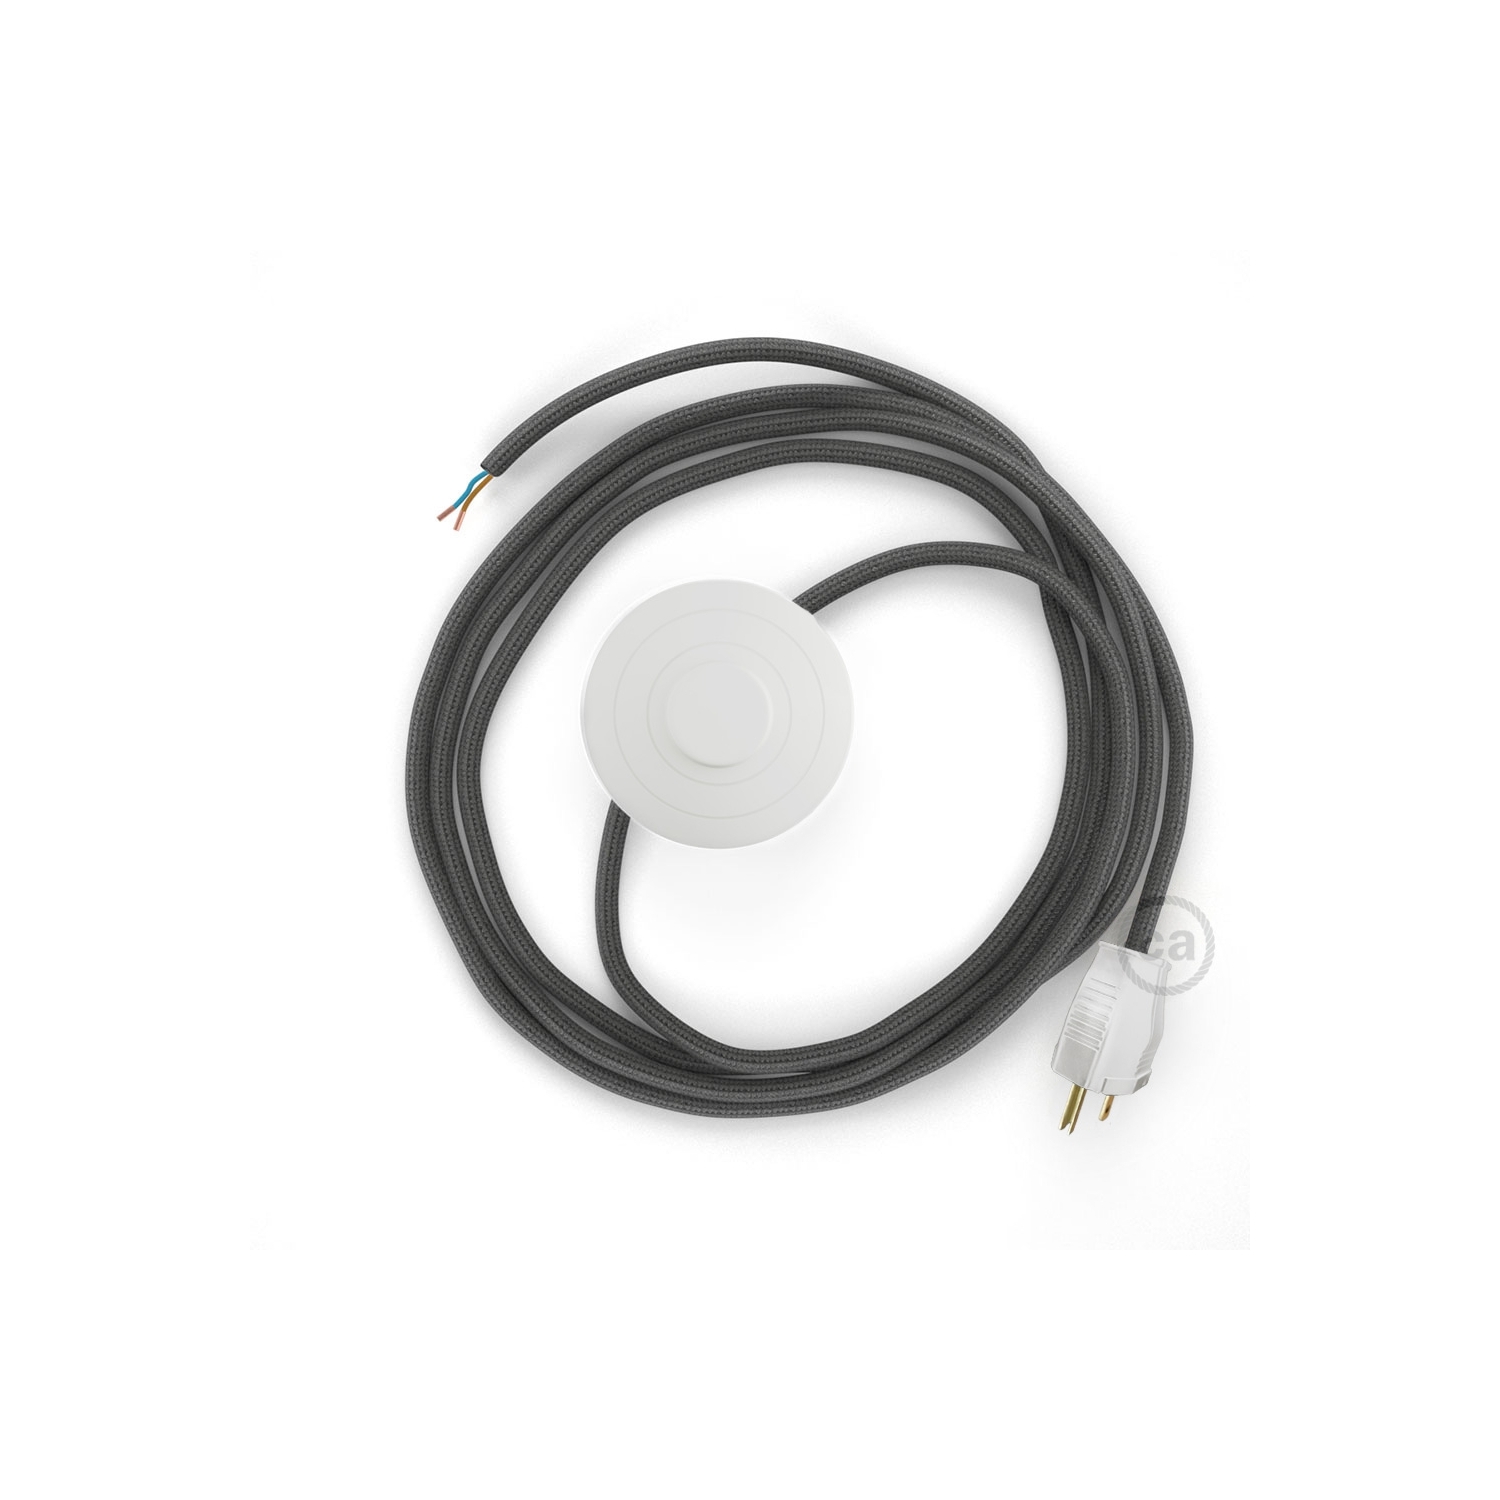 Power Cord with foot switch, RM26 Dark Gray Rayon - Choose color of switch/plug